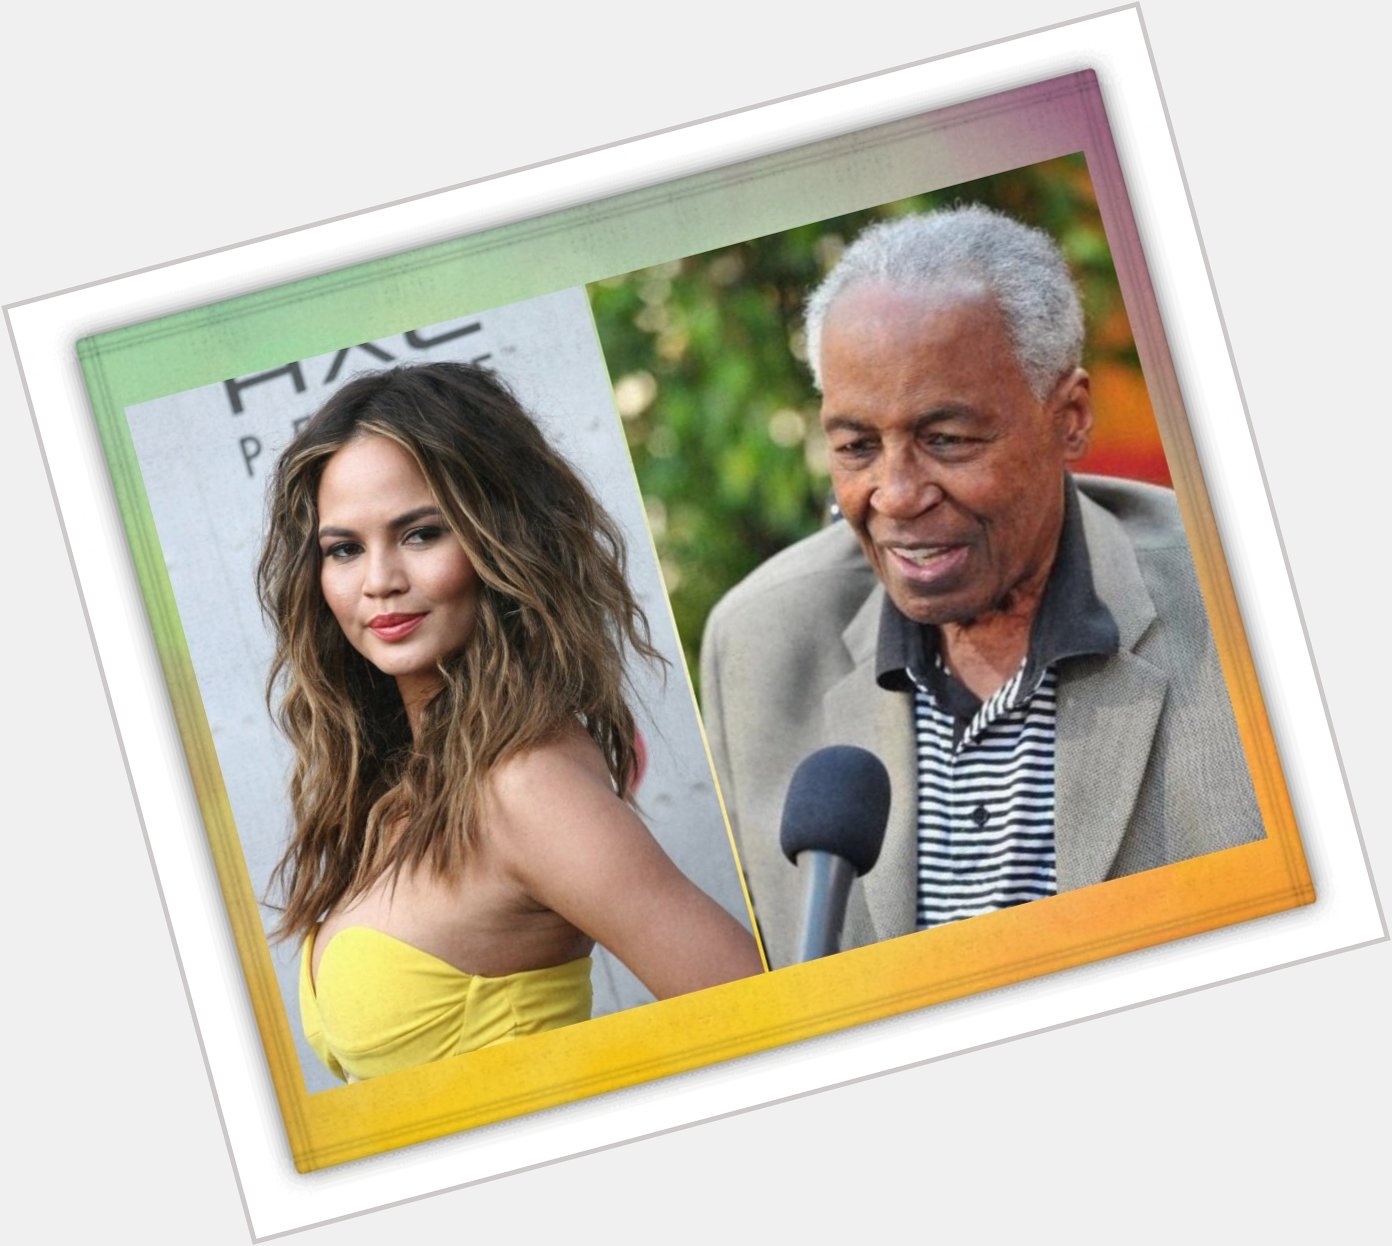  wishes Chrissy Teigen and Robert Guillaume, a very happy birthday  